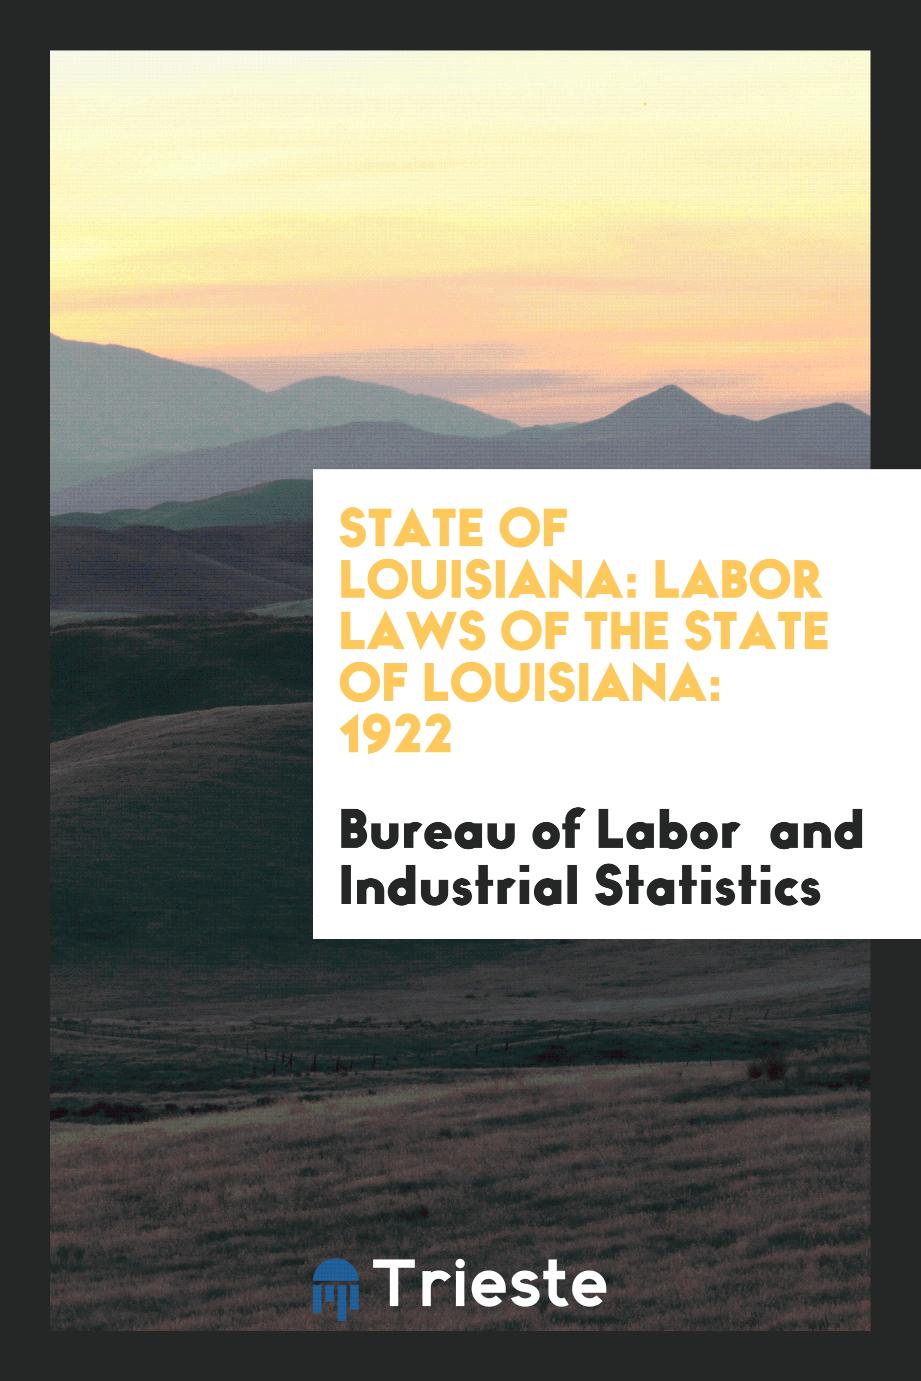 State of Louisiana: Labor Laws of the State of Louisiana: 1922